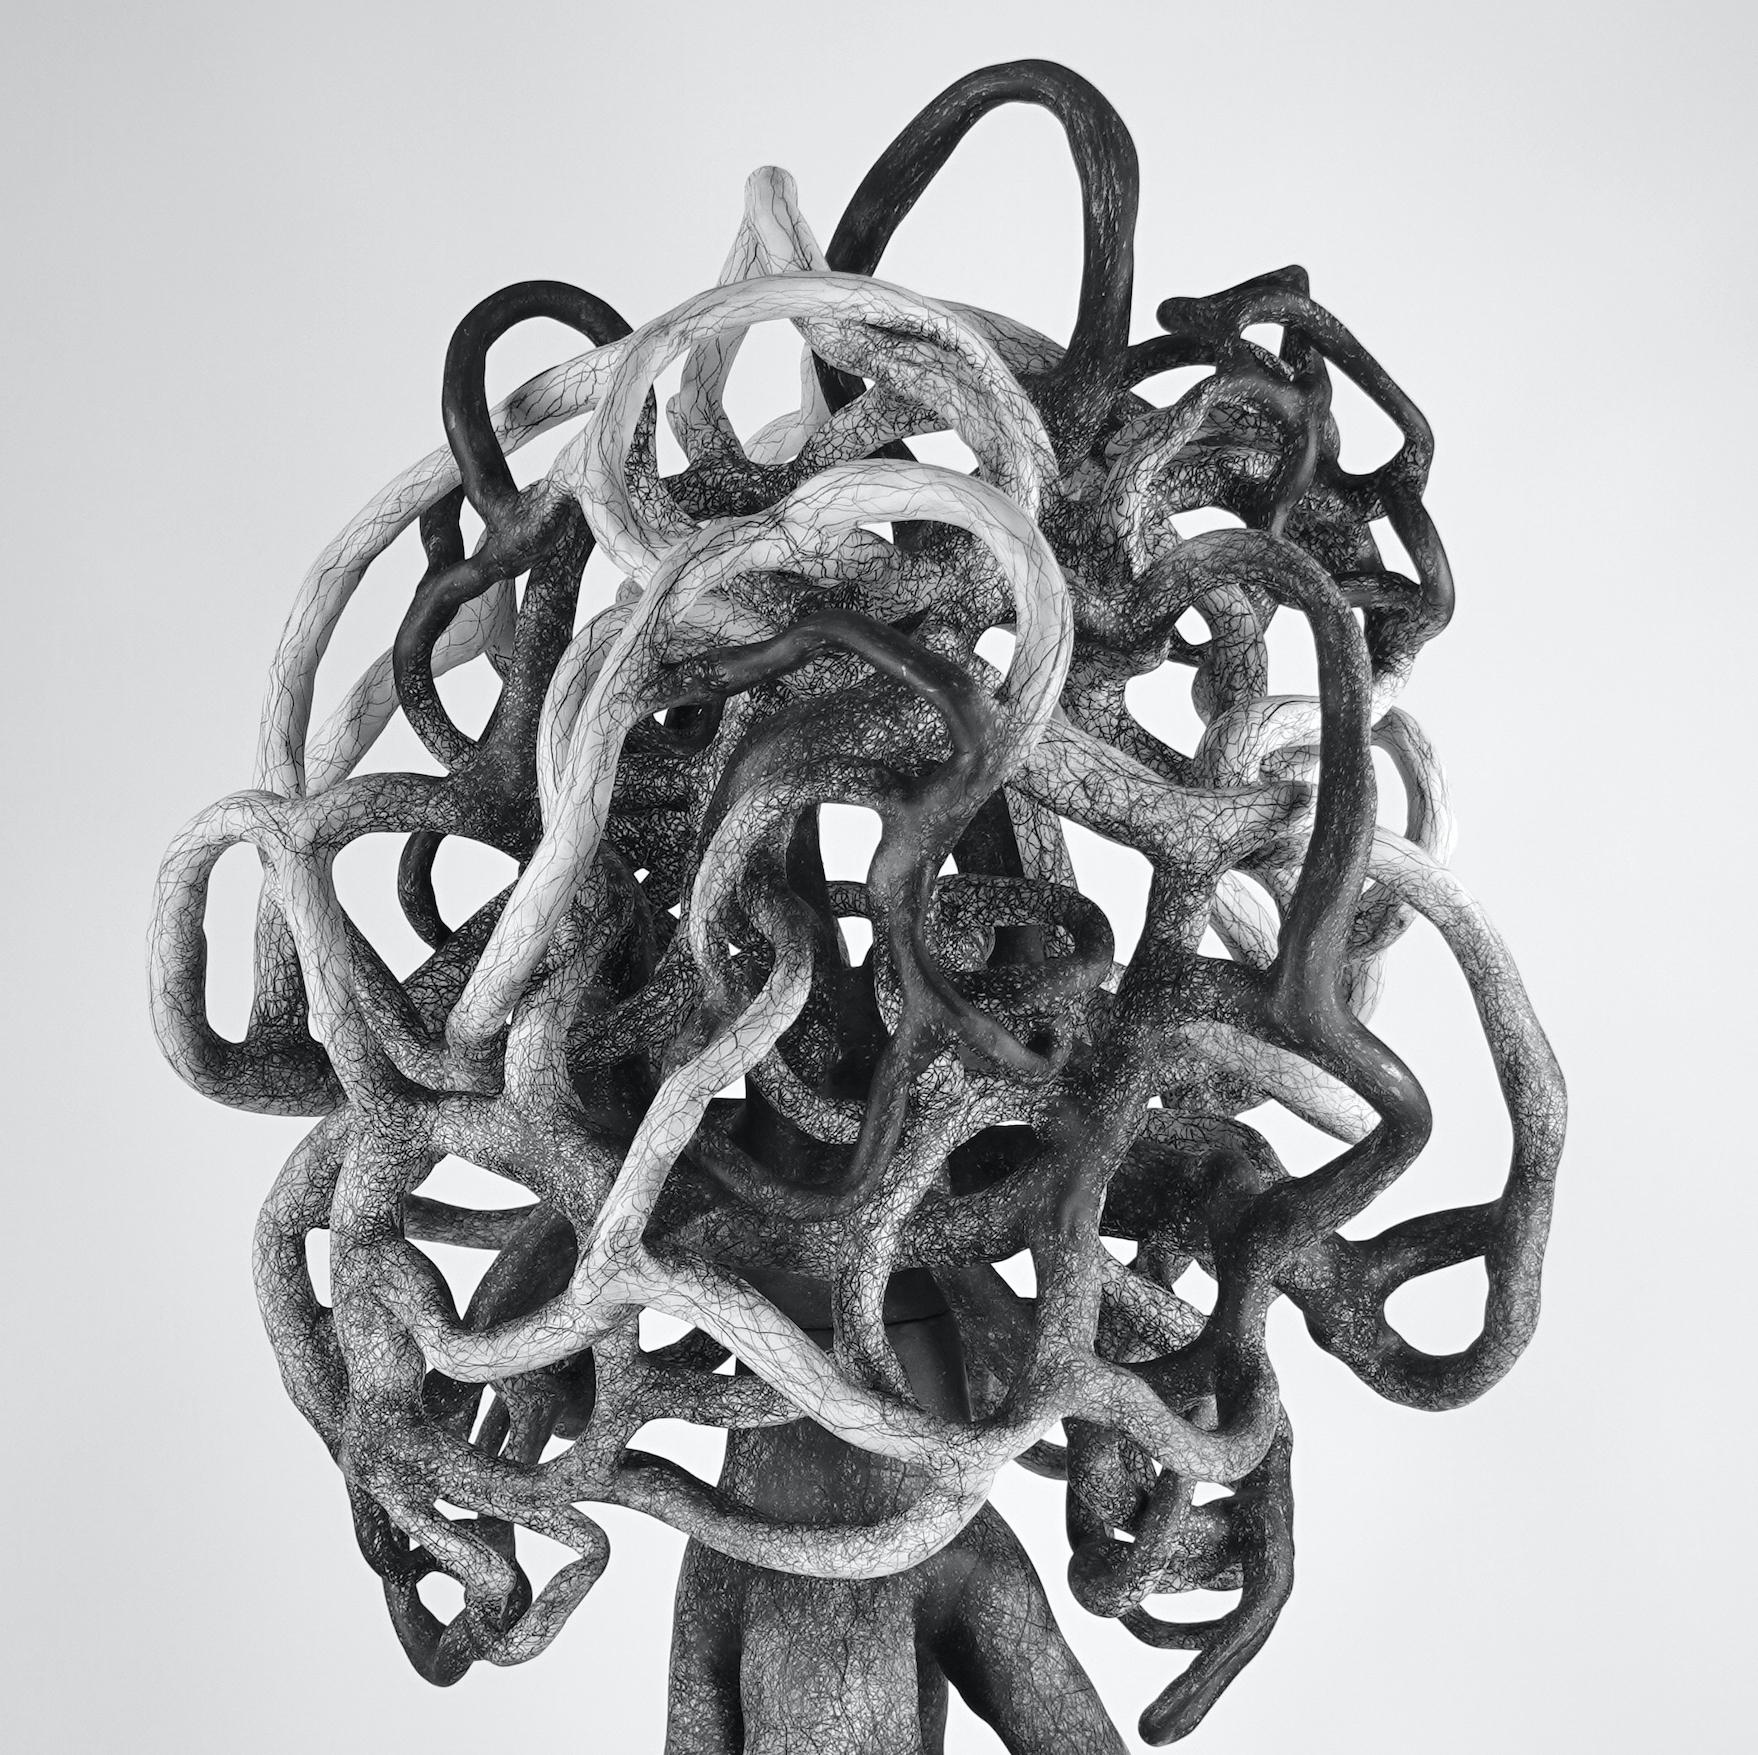 Judi Tavill( NJ) creates biomorphic abstraction coupling sculpture with drawing that references the complicated experience of connection and entanglement.
After receiving her BFA from Washington University in Saint Louis, Tavill began her creative